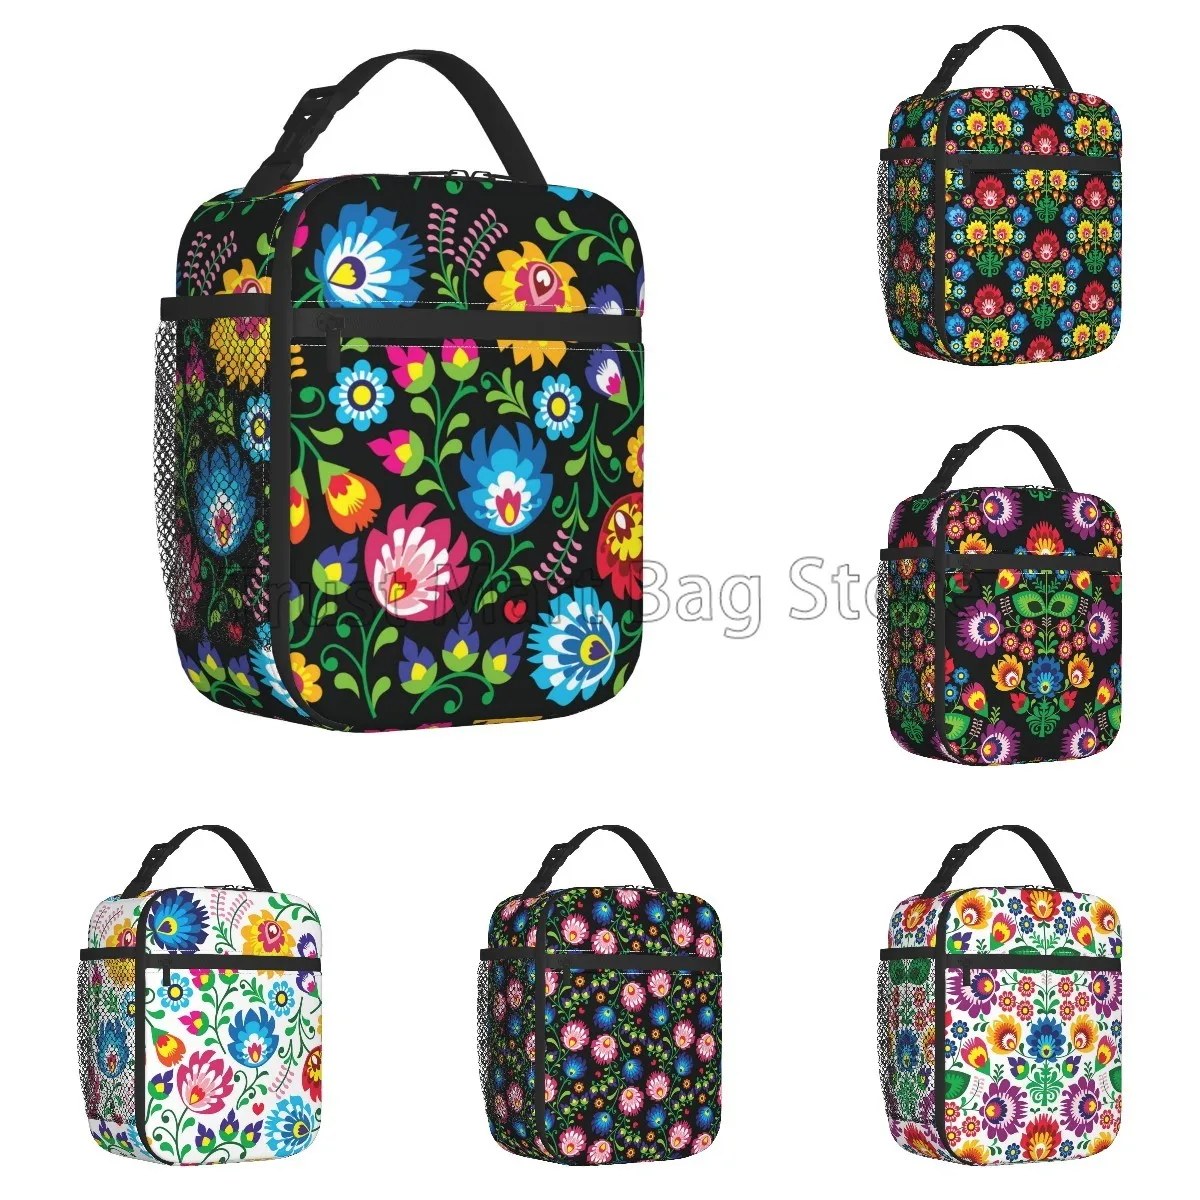 

Poland Polish Floral Folk Art Flower Insulated Lunch Bag Reusable Portable Waterproof Lunch Box Thermal Oxford Bento Tote Bag